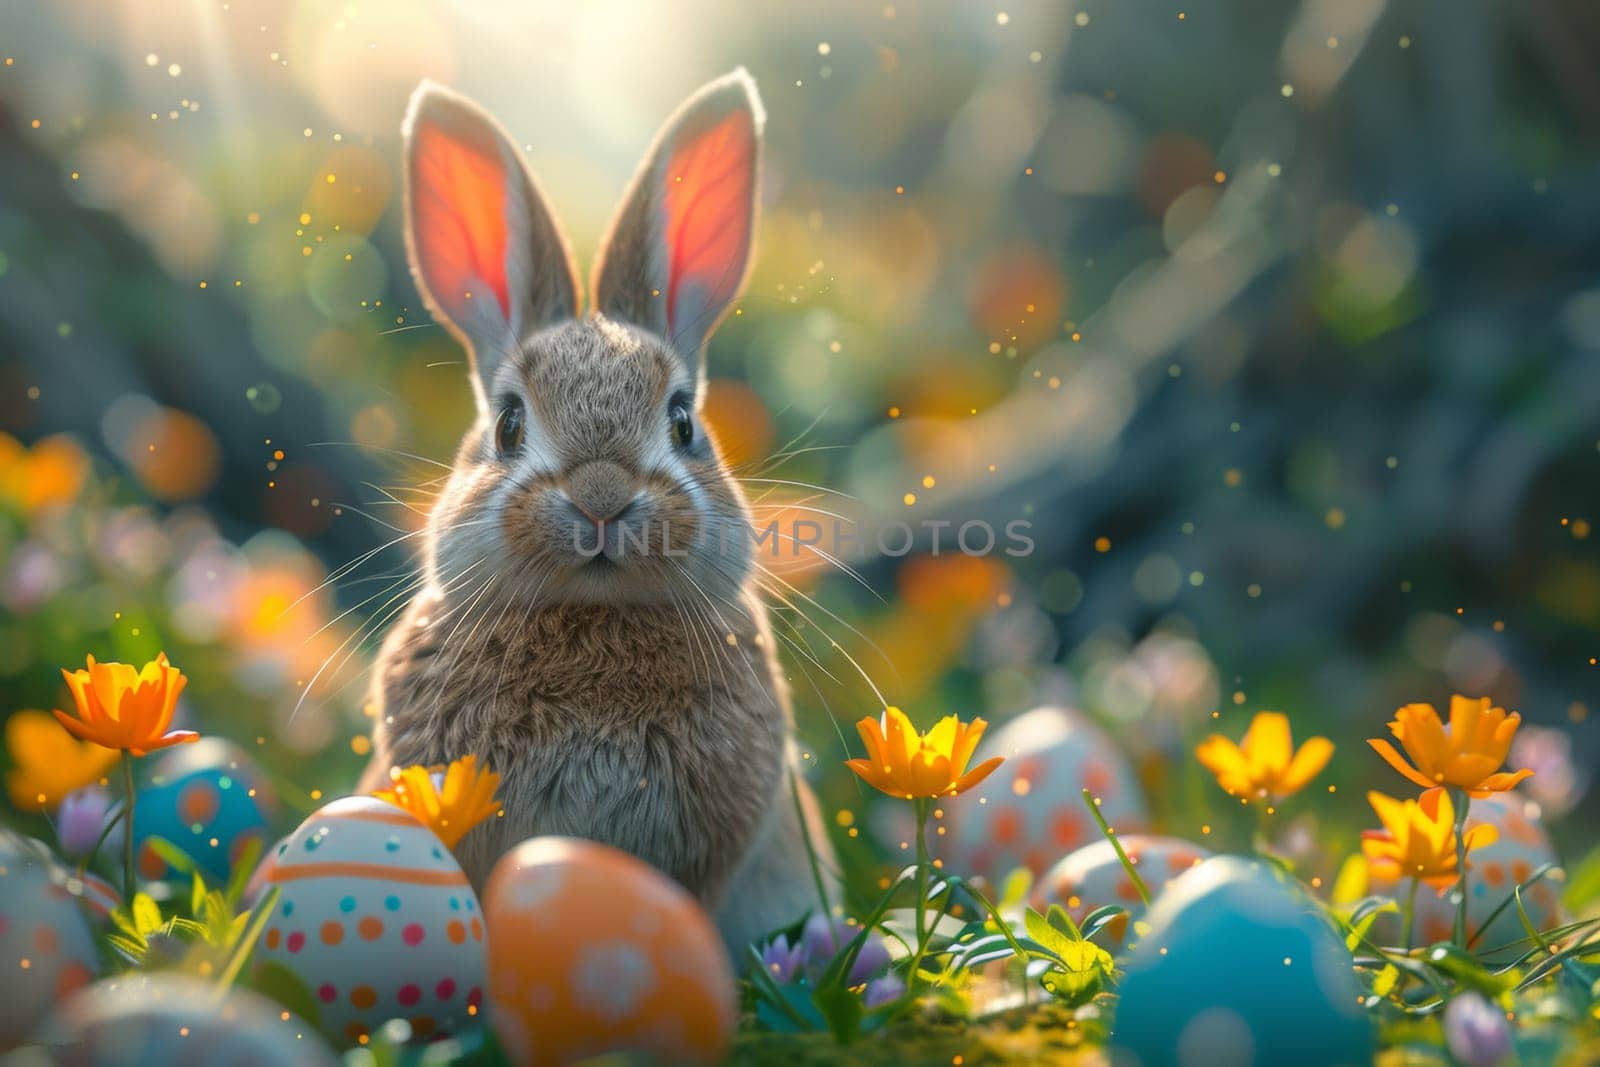 A rabbit is standing in a field of flowers and eggs. The rabbit is looking at the camera with its ears up. The scene is bright and cheerful, with the rabbit and flowers creating a sense of playfulness